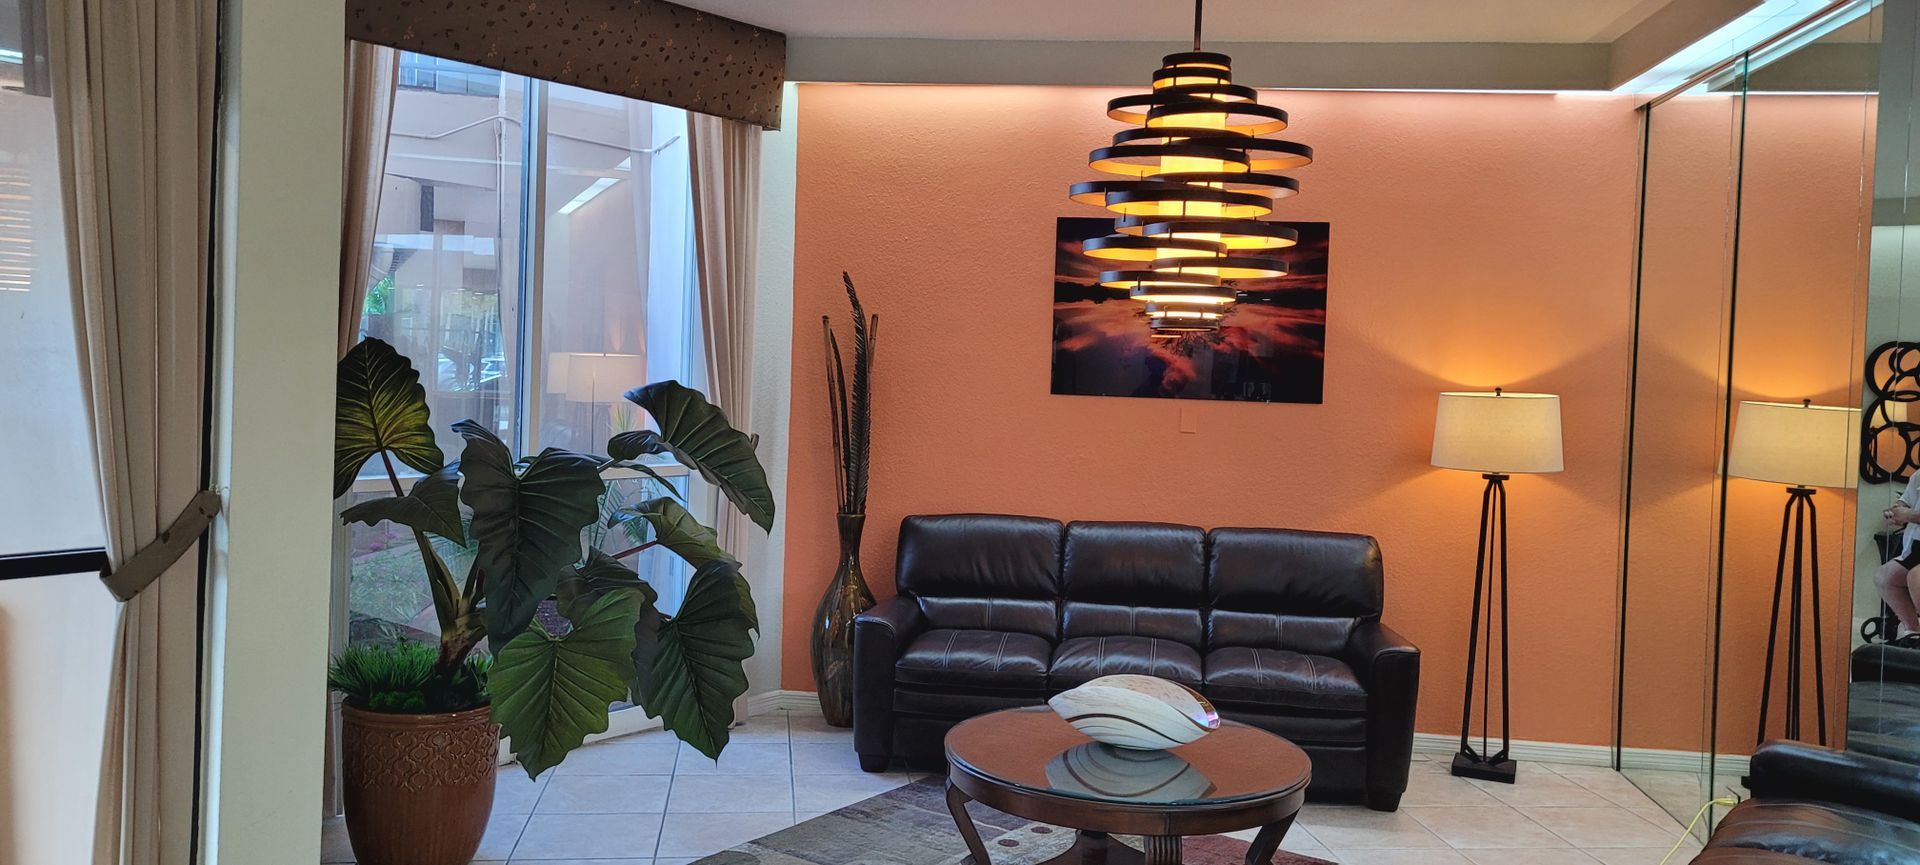 Interior Condo lobby - Commercial painting in Pembroke Pines